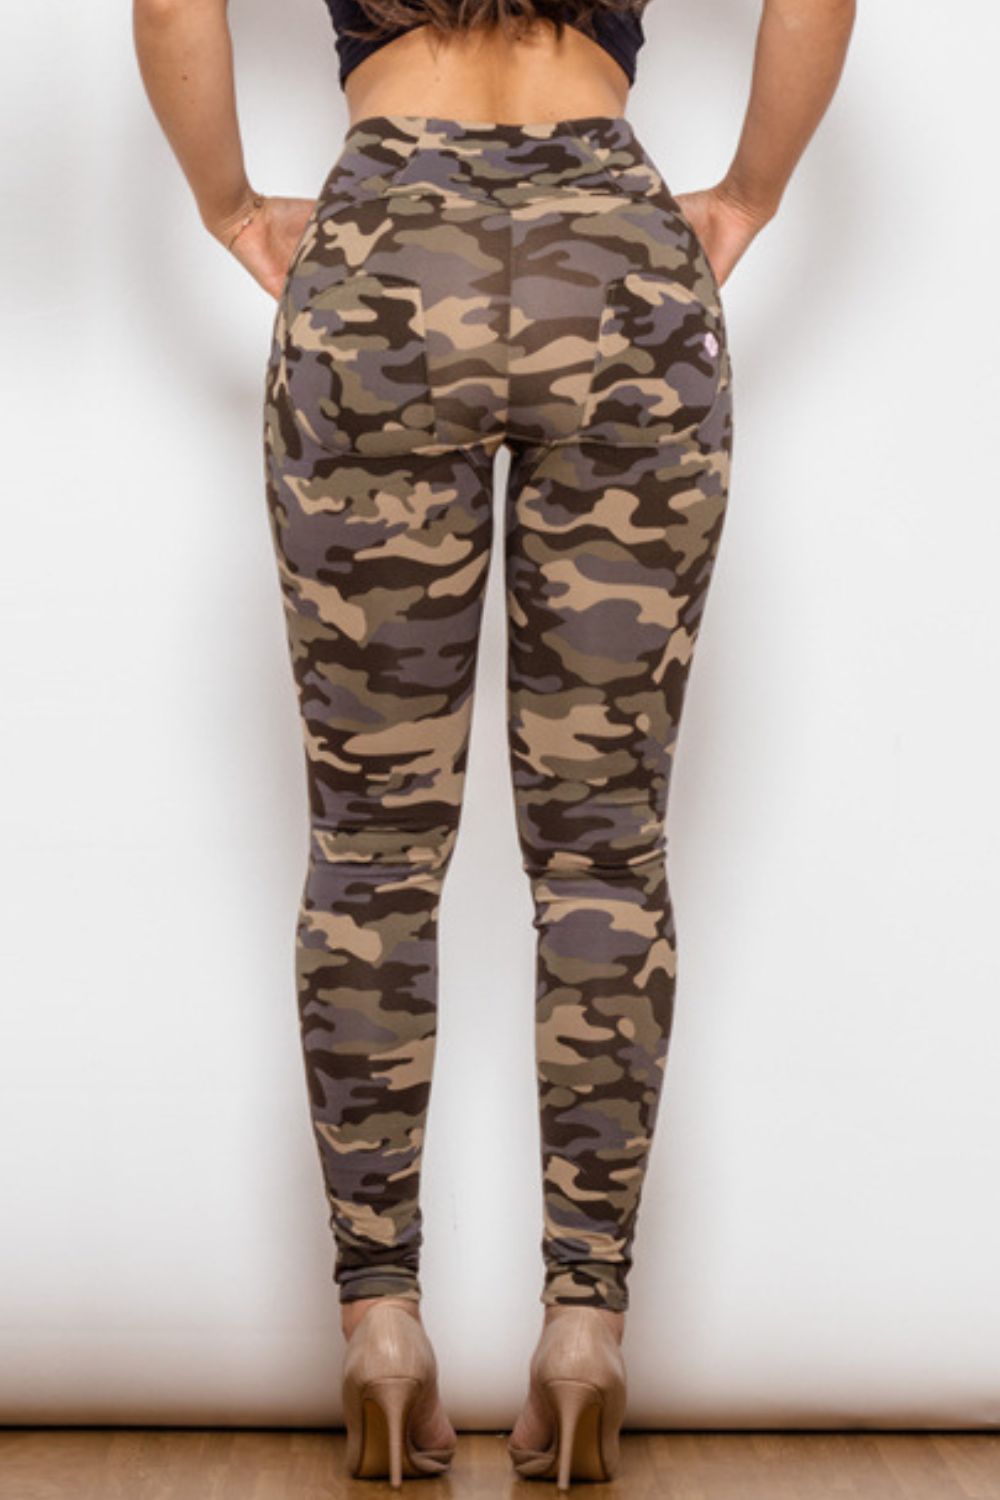 Women’s Camouflage Print Jeans